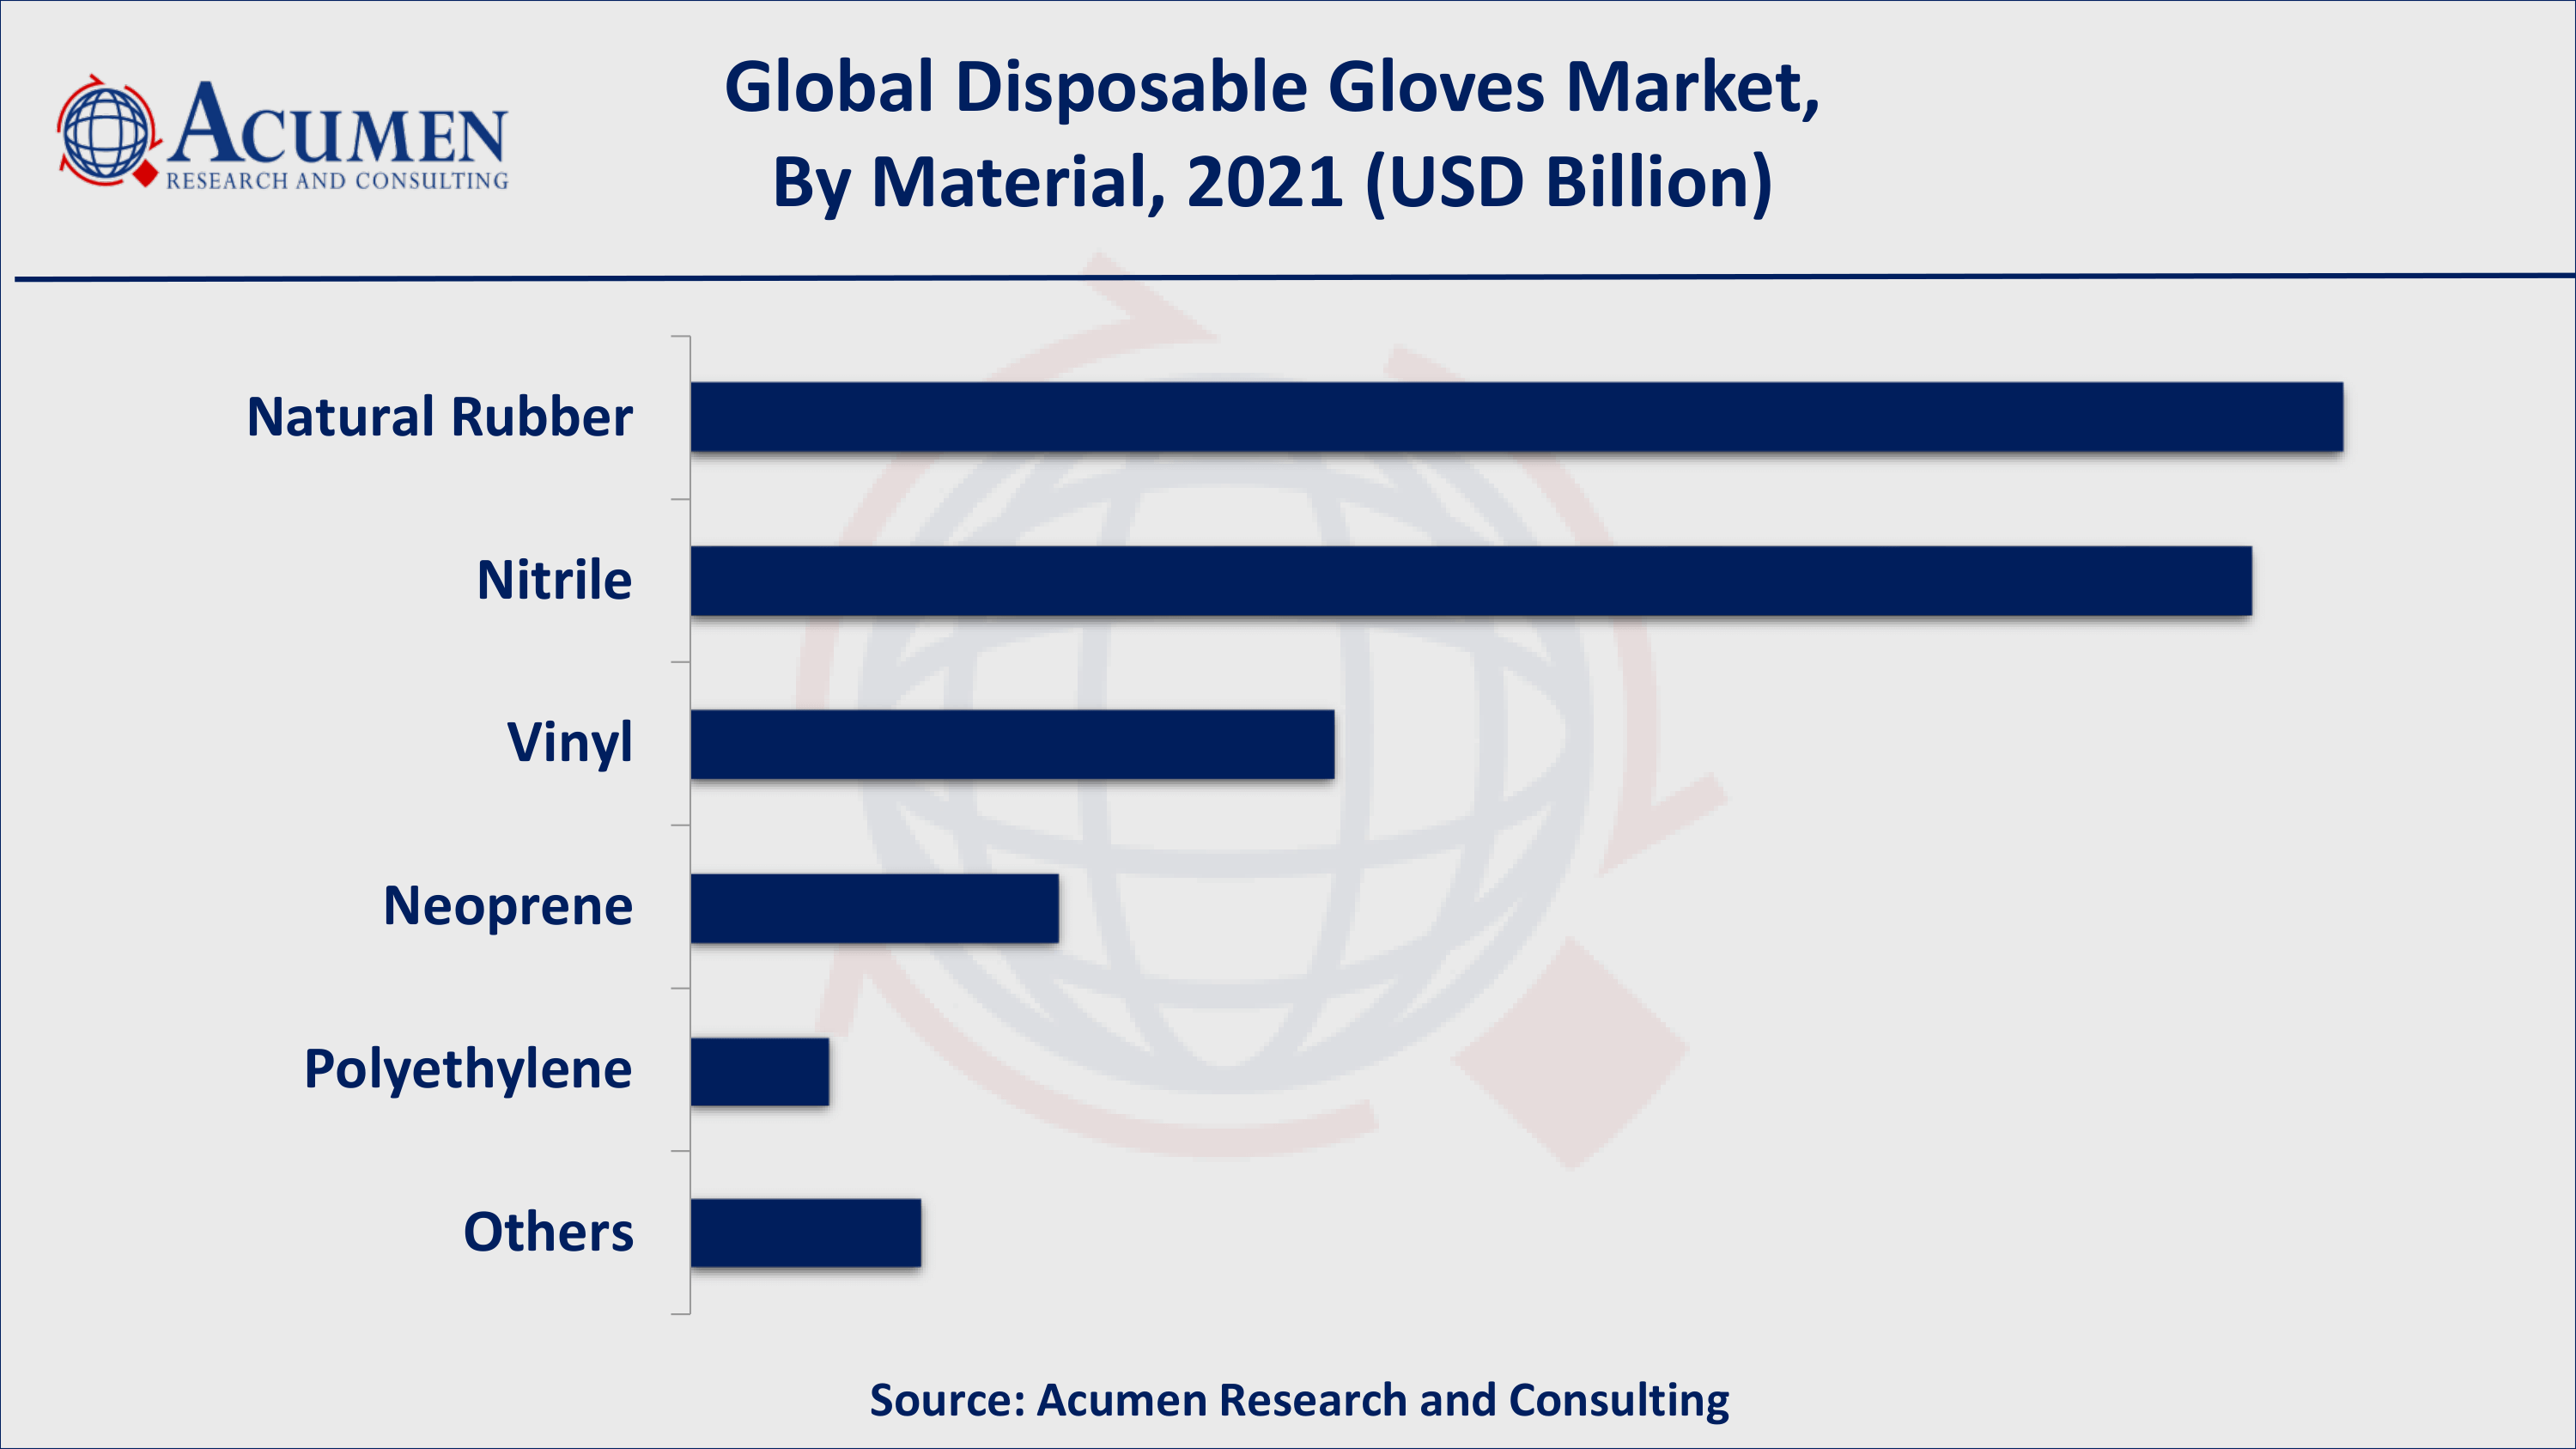 Based on materials, nitrile gloves acquired over 30% of the overall market share in 2021